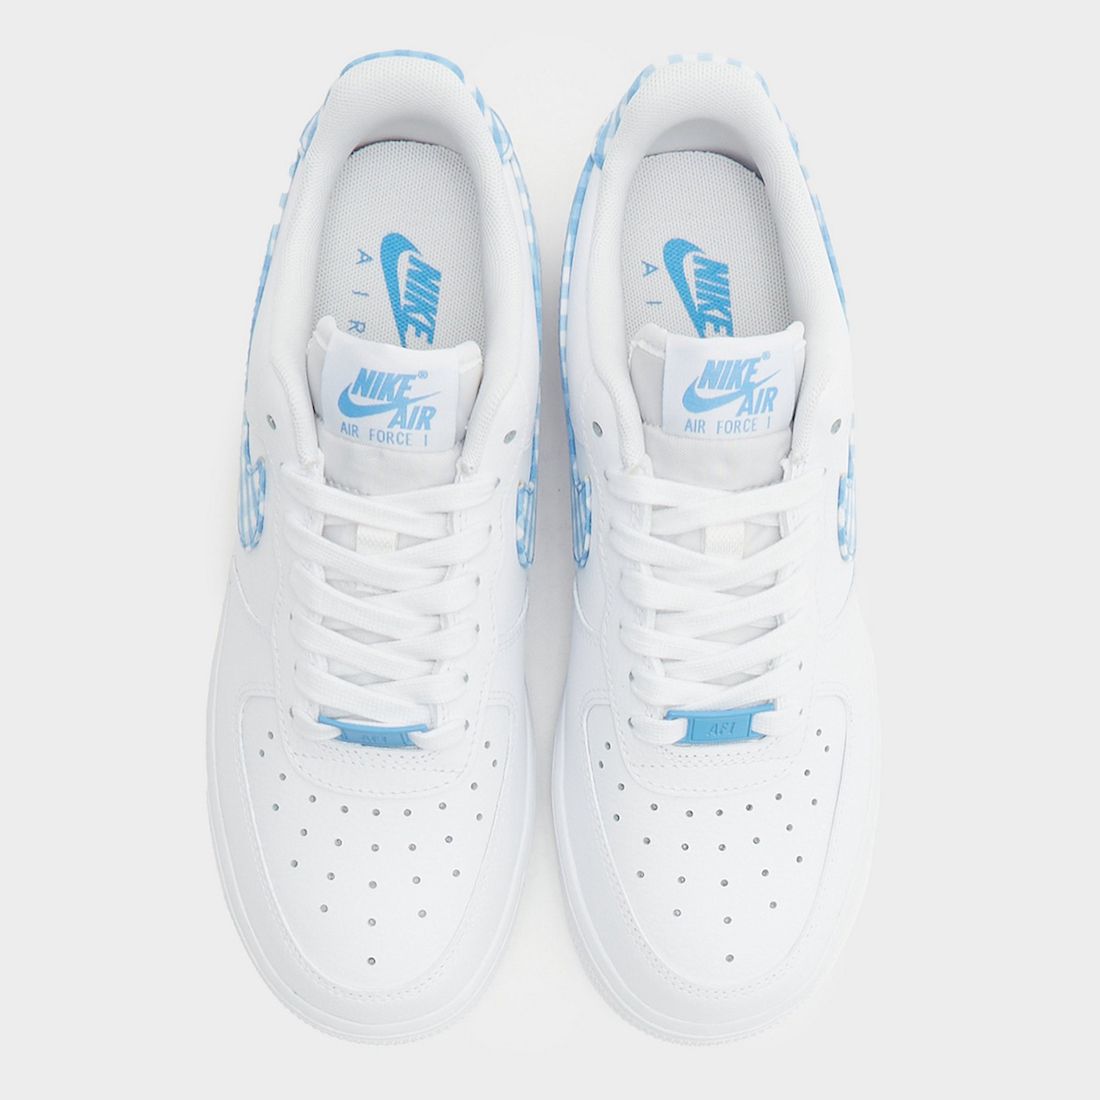 Nike Air Force 1 Low Blue Gingham Release Date 2